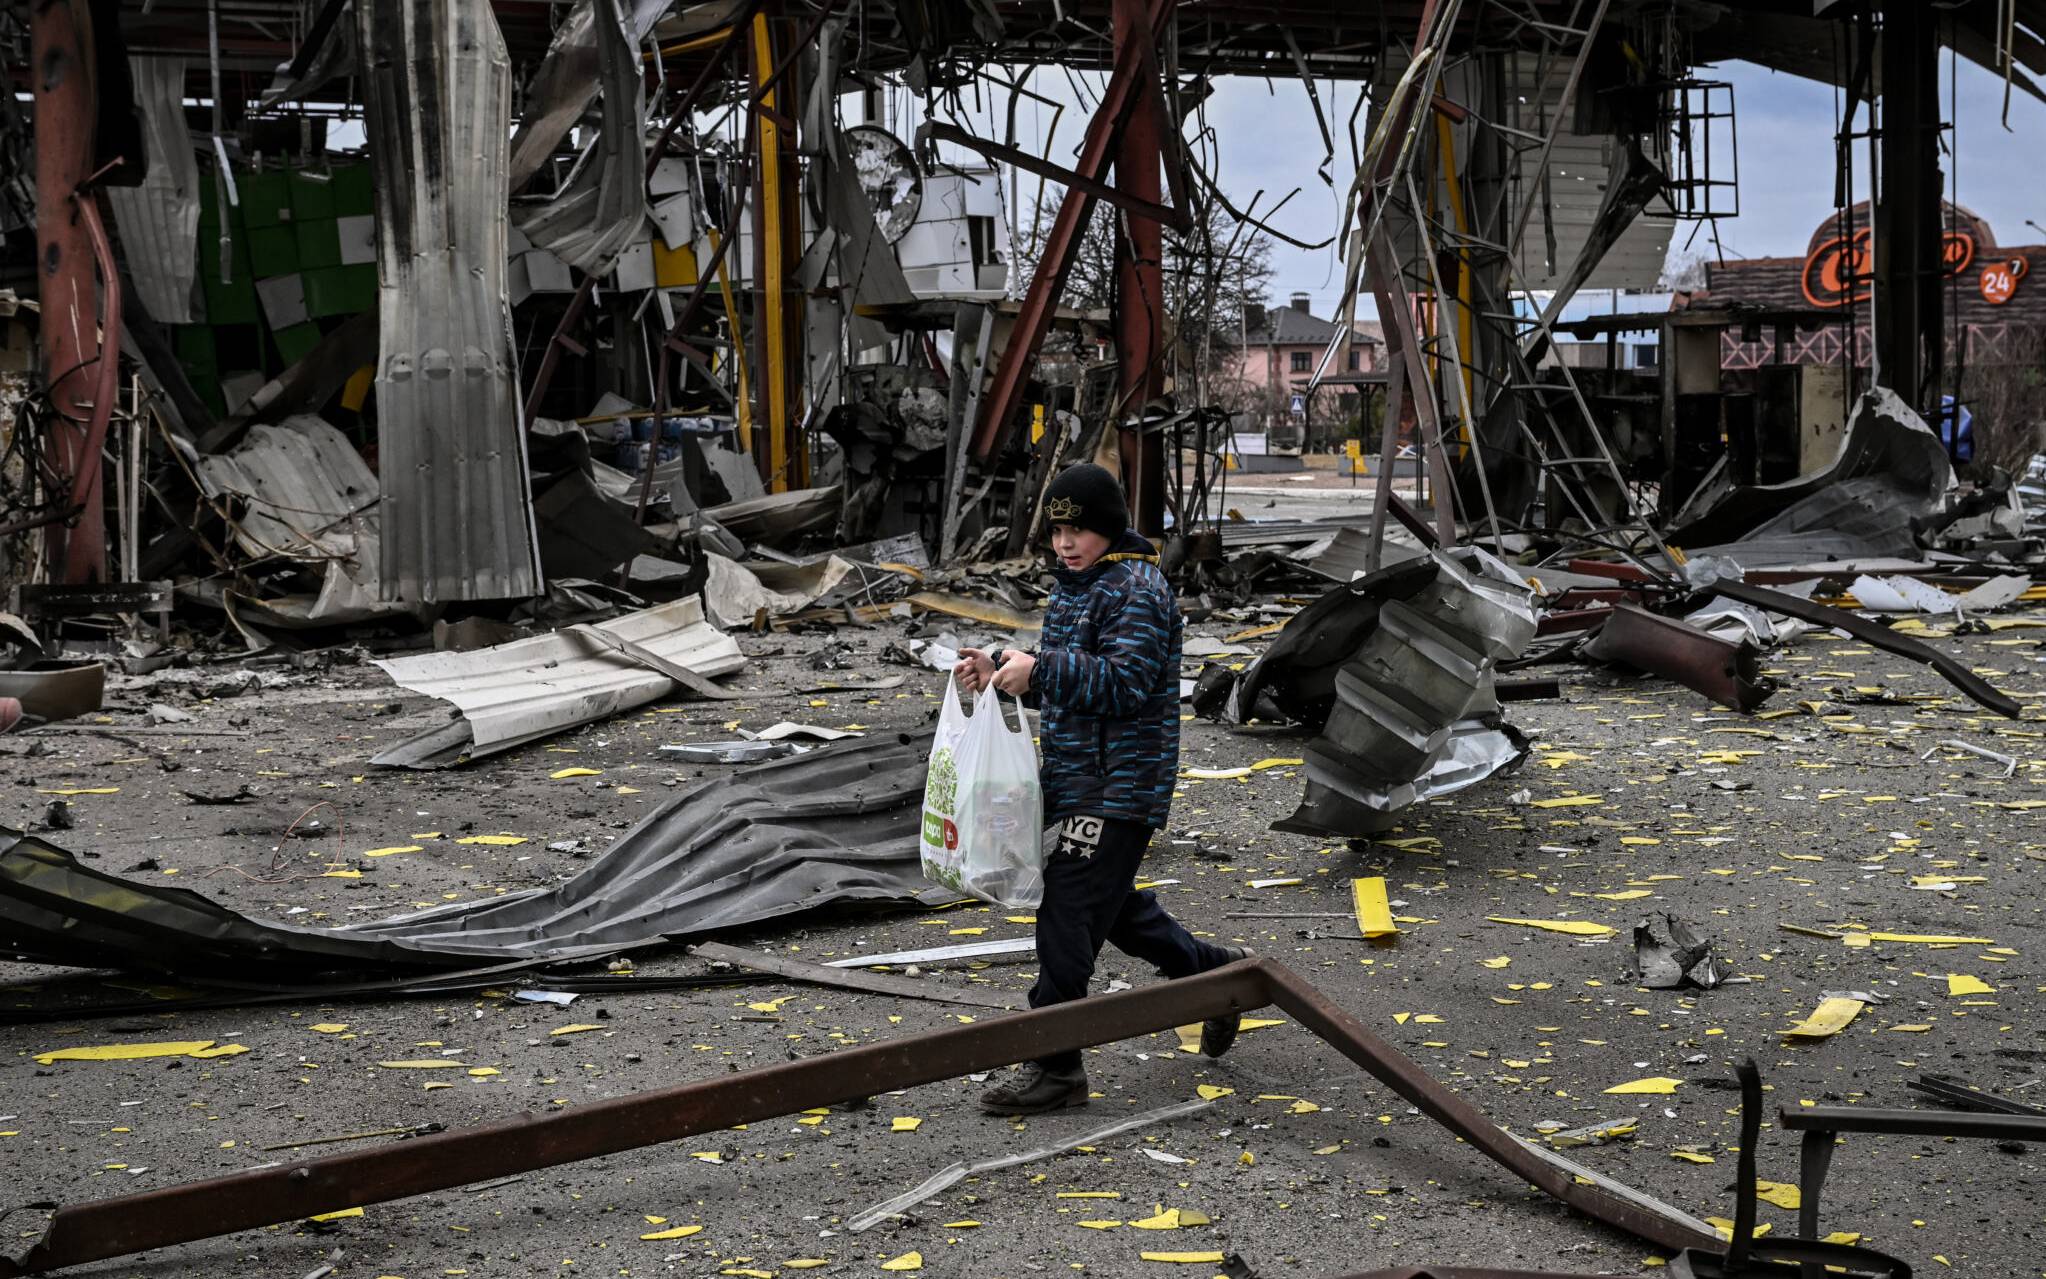 A child evacuates the city of Irpin, northwest of Kyiv, during heavy shelling and bombing on March 5, 2022, ten days after Russia launched a military invasion on Ukraine. (Photo by Aris Messinis / AFP)